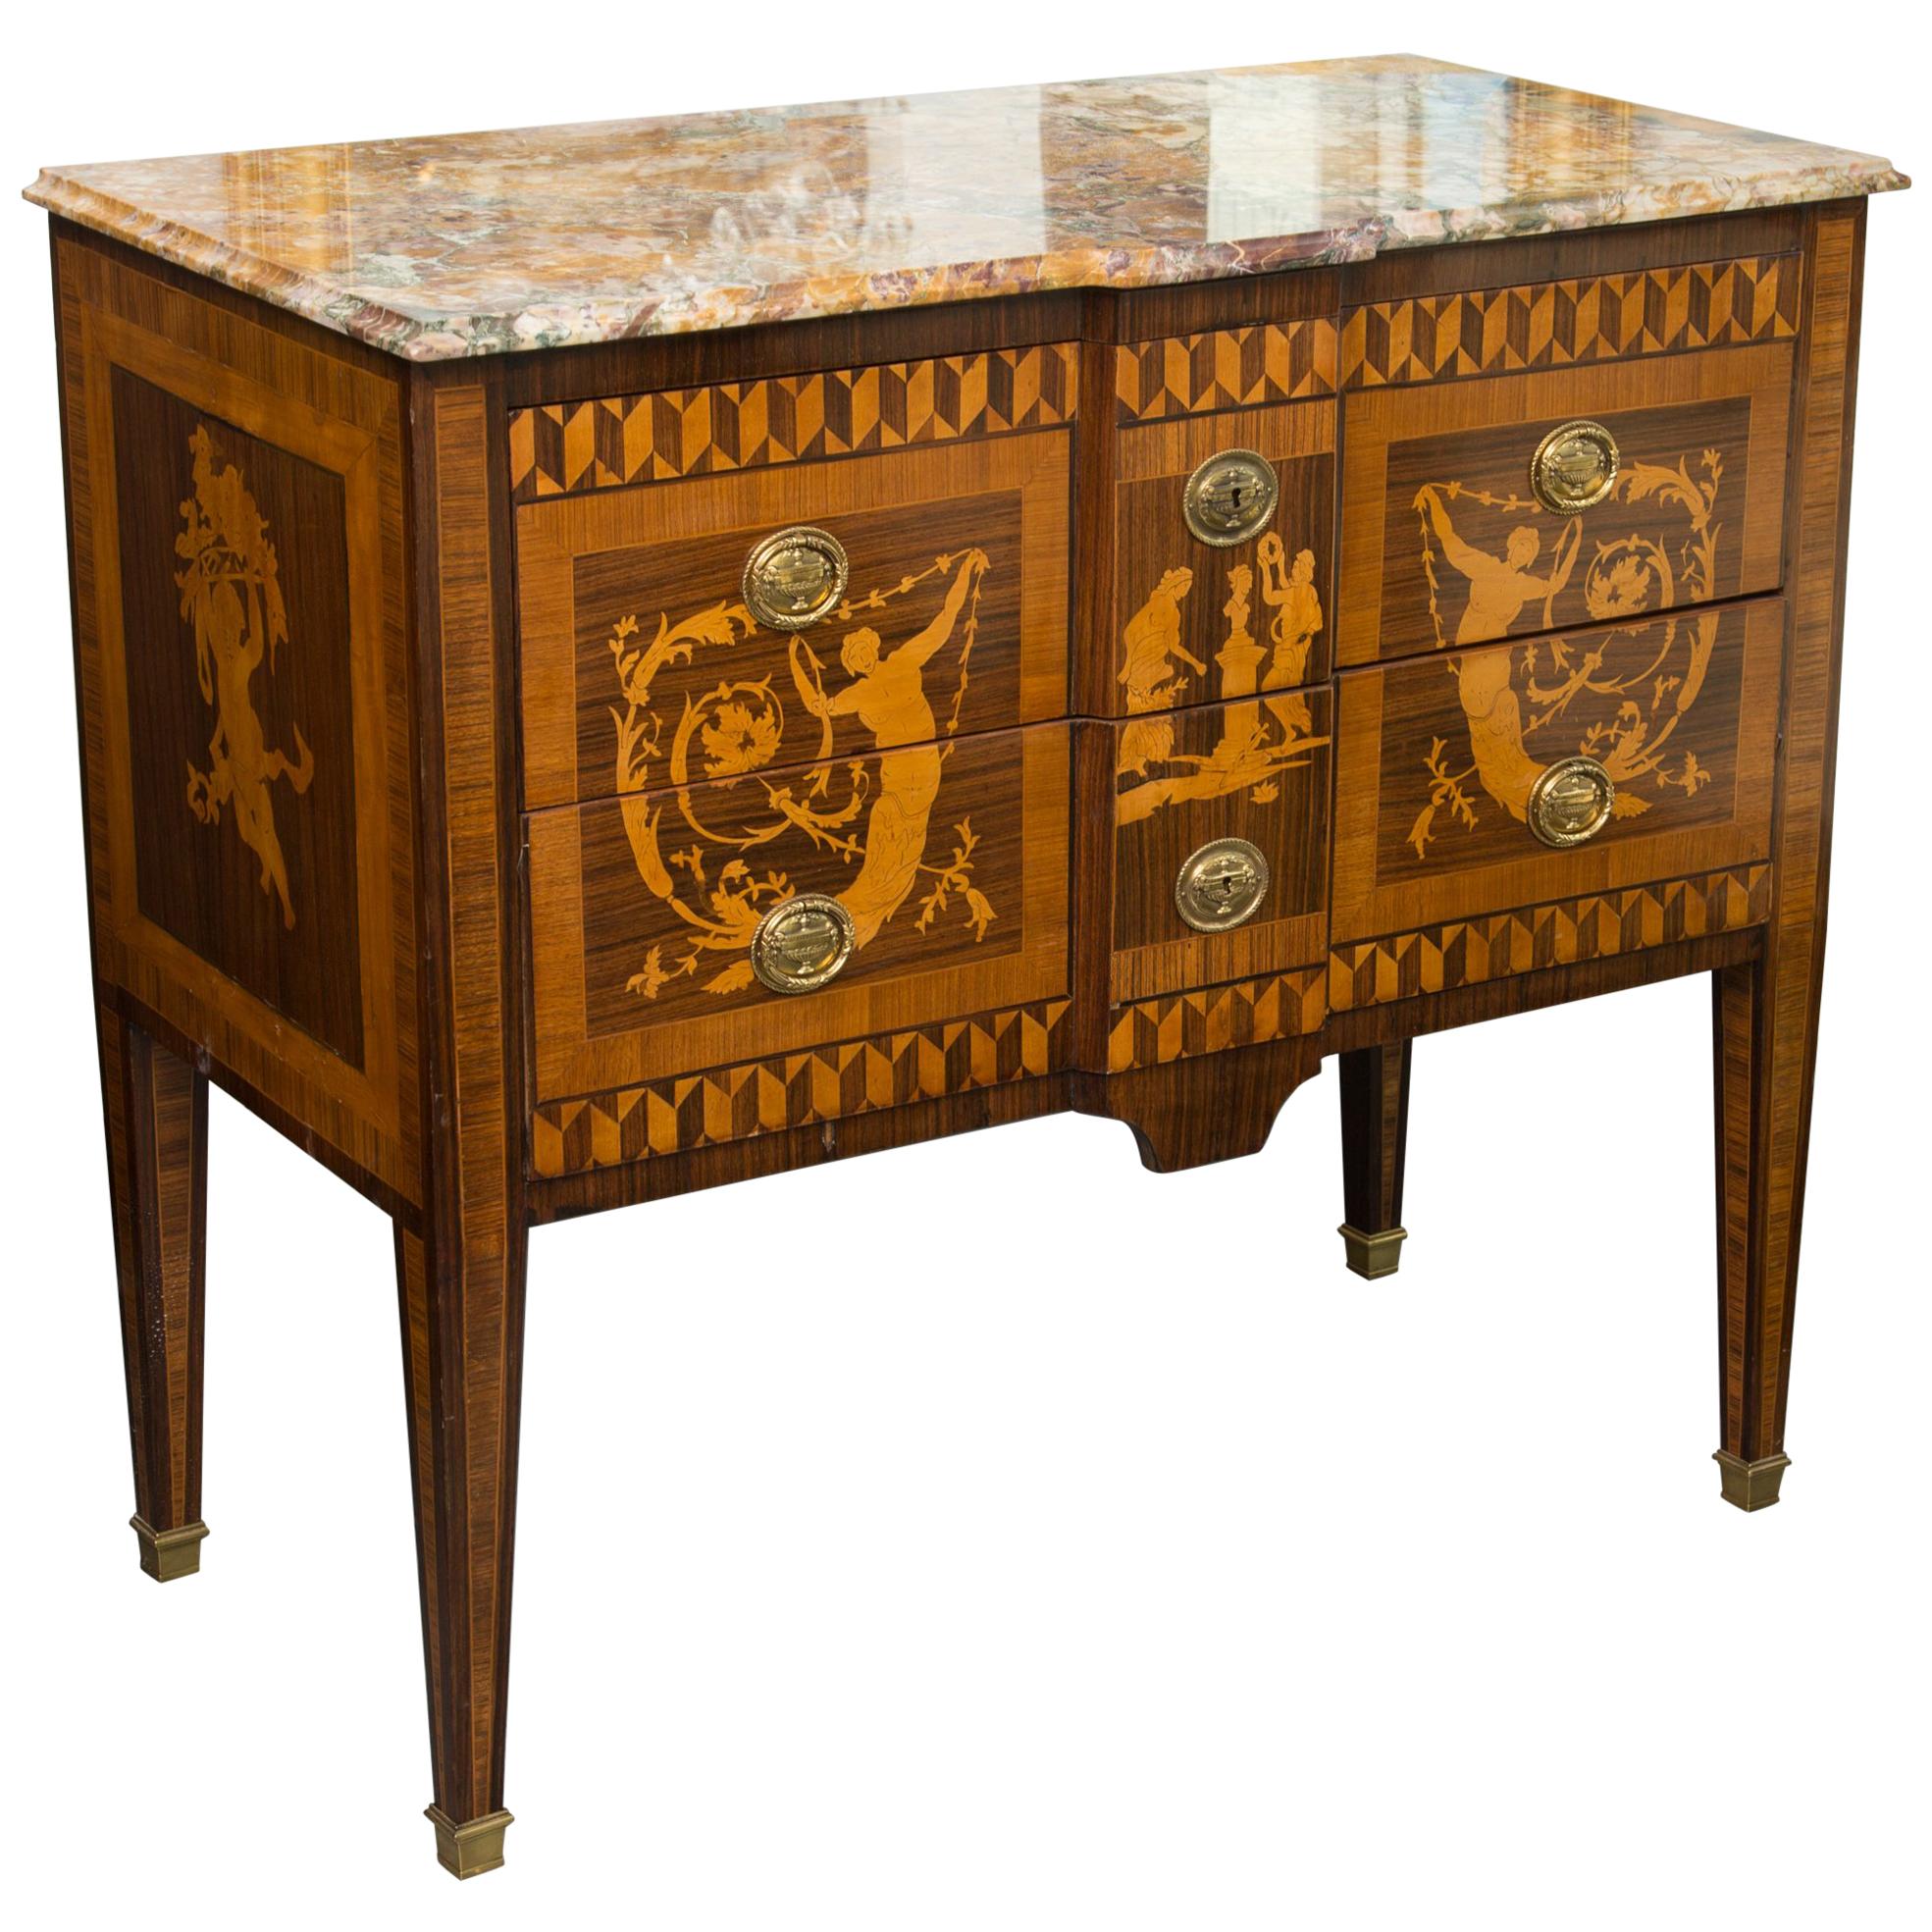 19th Century Italian Marquetry Inlaid Commode with Marble Top For Sale